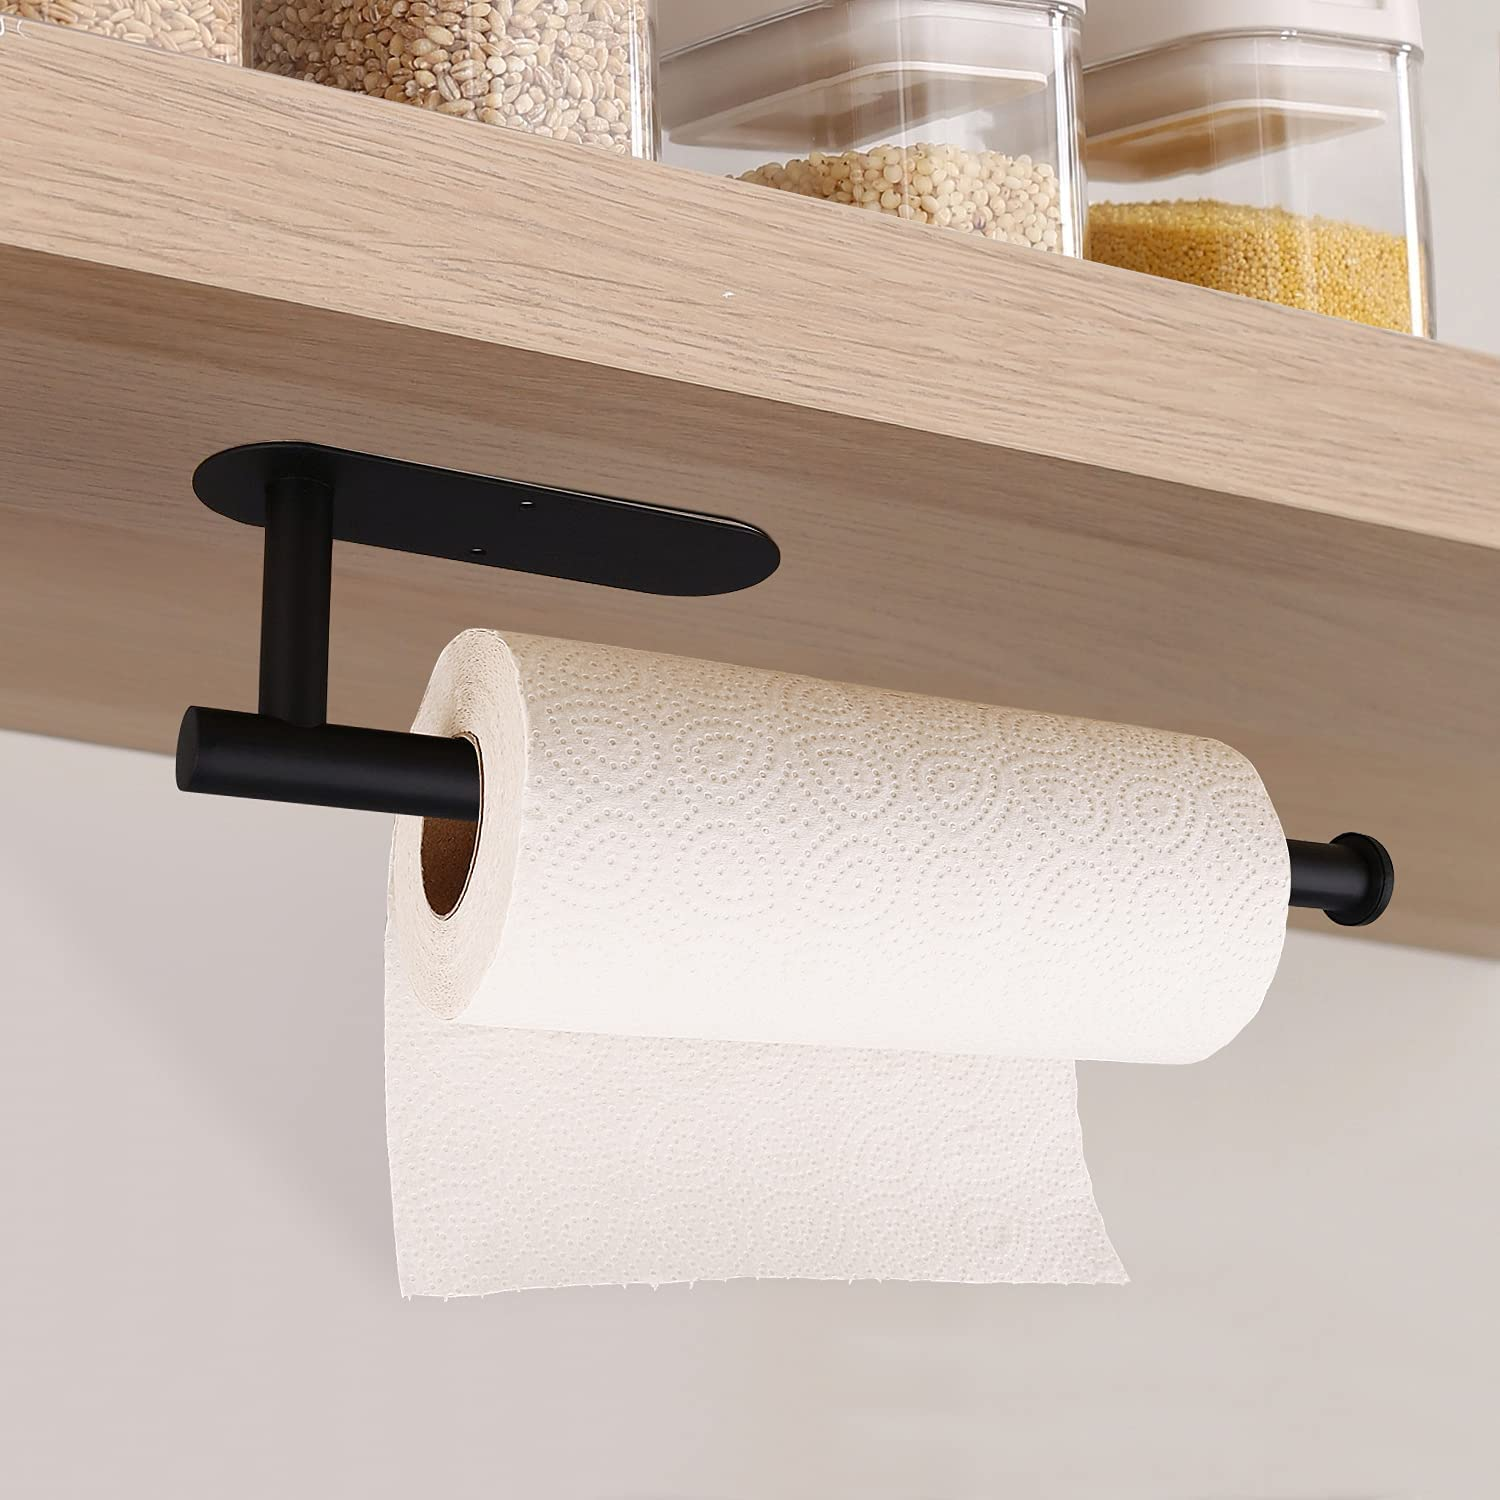 Paper Towel Holders-Blcak,Paper Towels Rolls - for Kitchen,Paper Towels Bulk- Self-Adhesive under Cabinet,Both Available in Adhesive and Screws,Stainless Steel